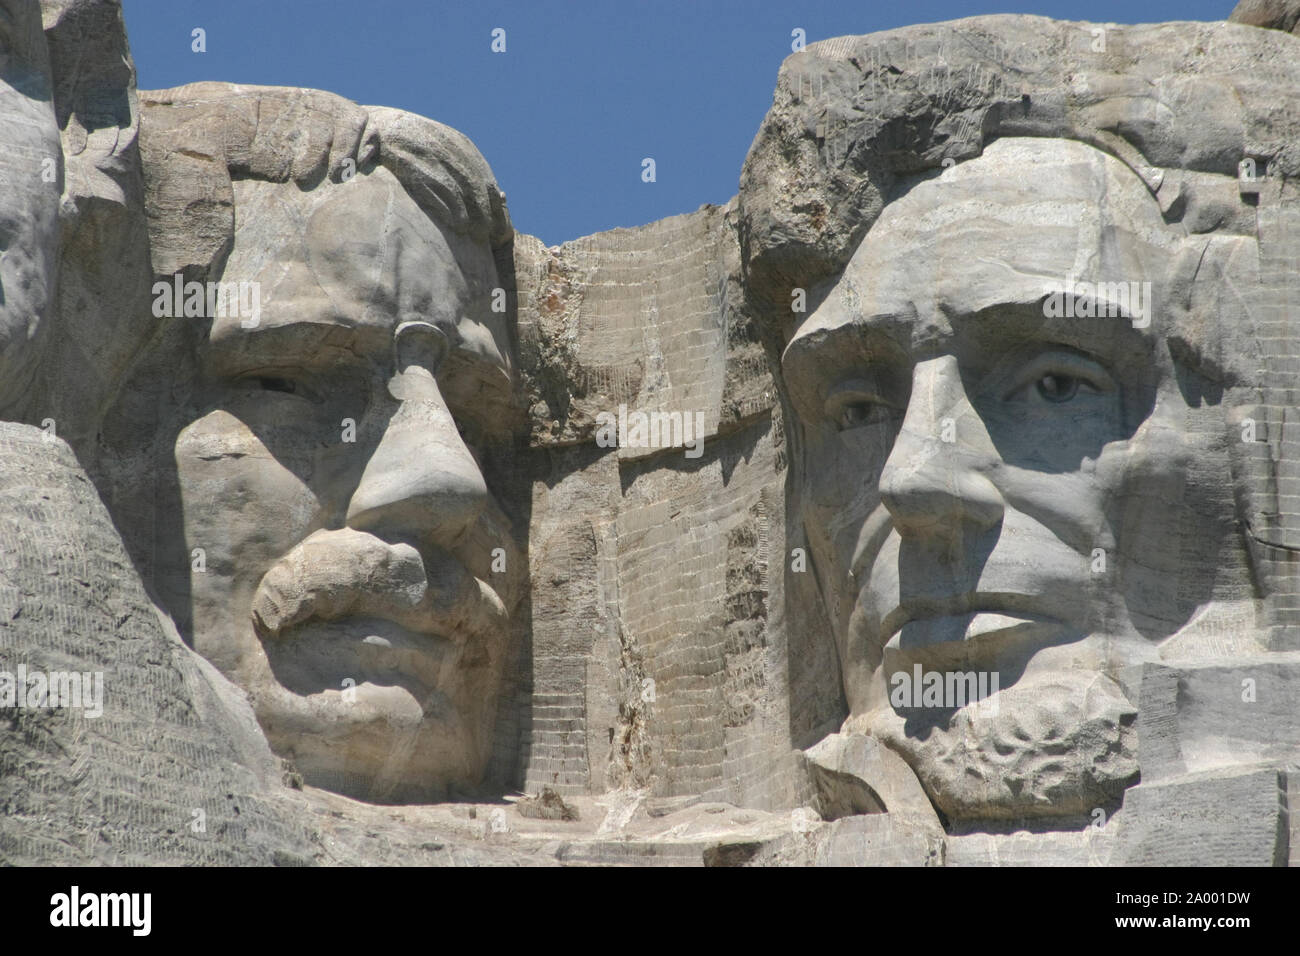 Presidents Theodore Roosevelt and Abraham Lincoln's stone faces on Mount Rushmore in South Dakota's Black Hills. Stock Photo